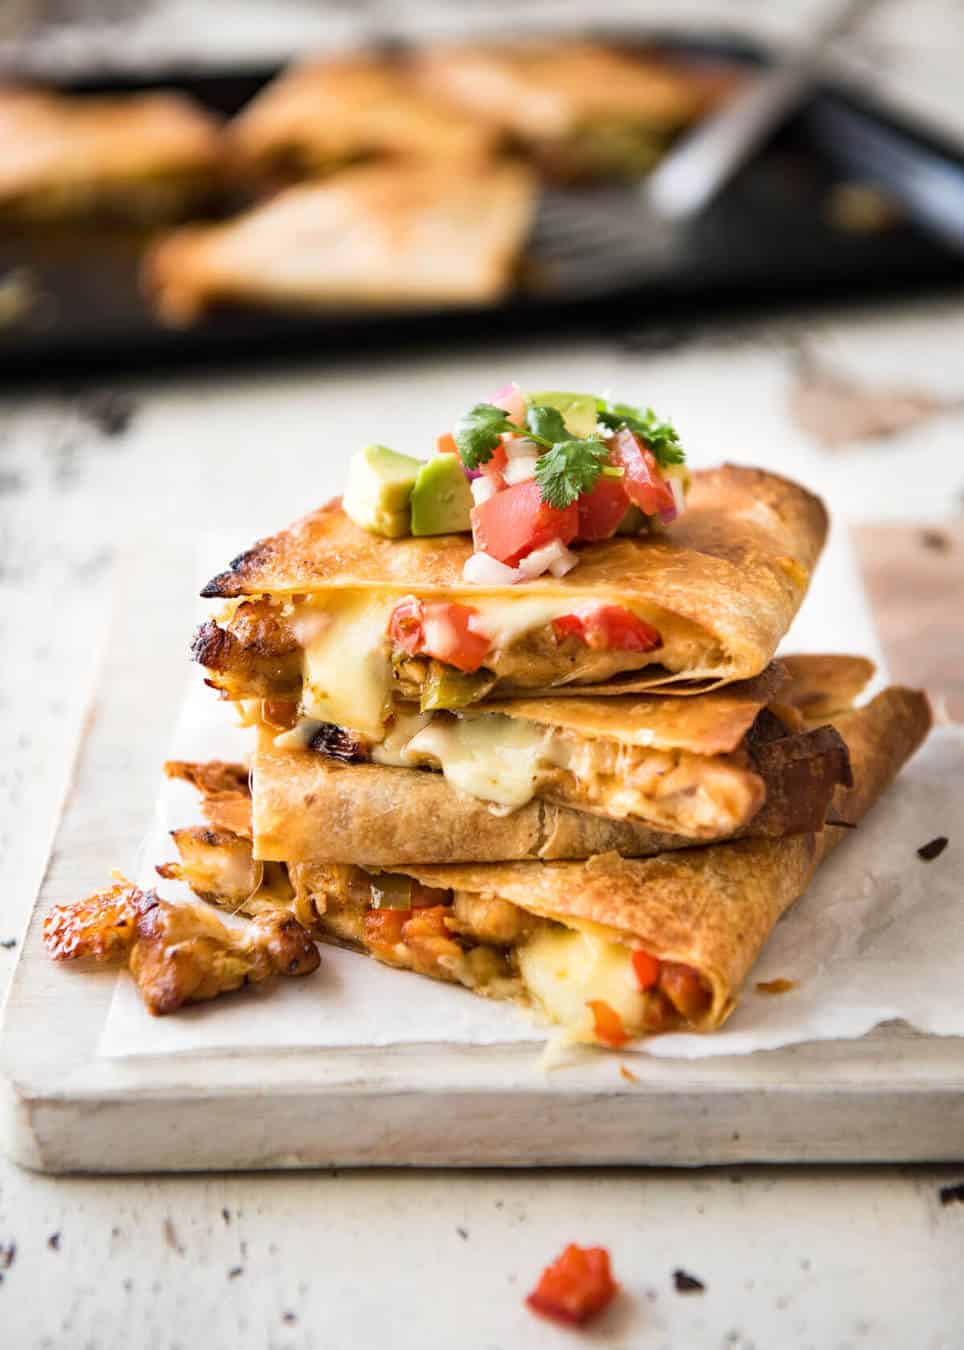 Crispy Oven Baked Chicken Quesadillas - This is how to make multiple Quesadillas at the same time! Crispy on the outside, stuffed with Mexican seasoned chicken and capsicum / bell peppers (and cheese of course!) www.recipetineats.com